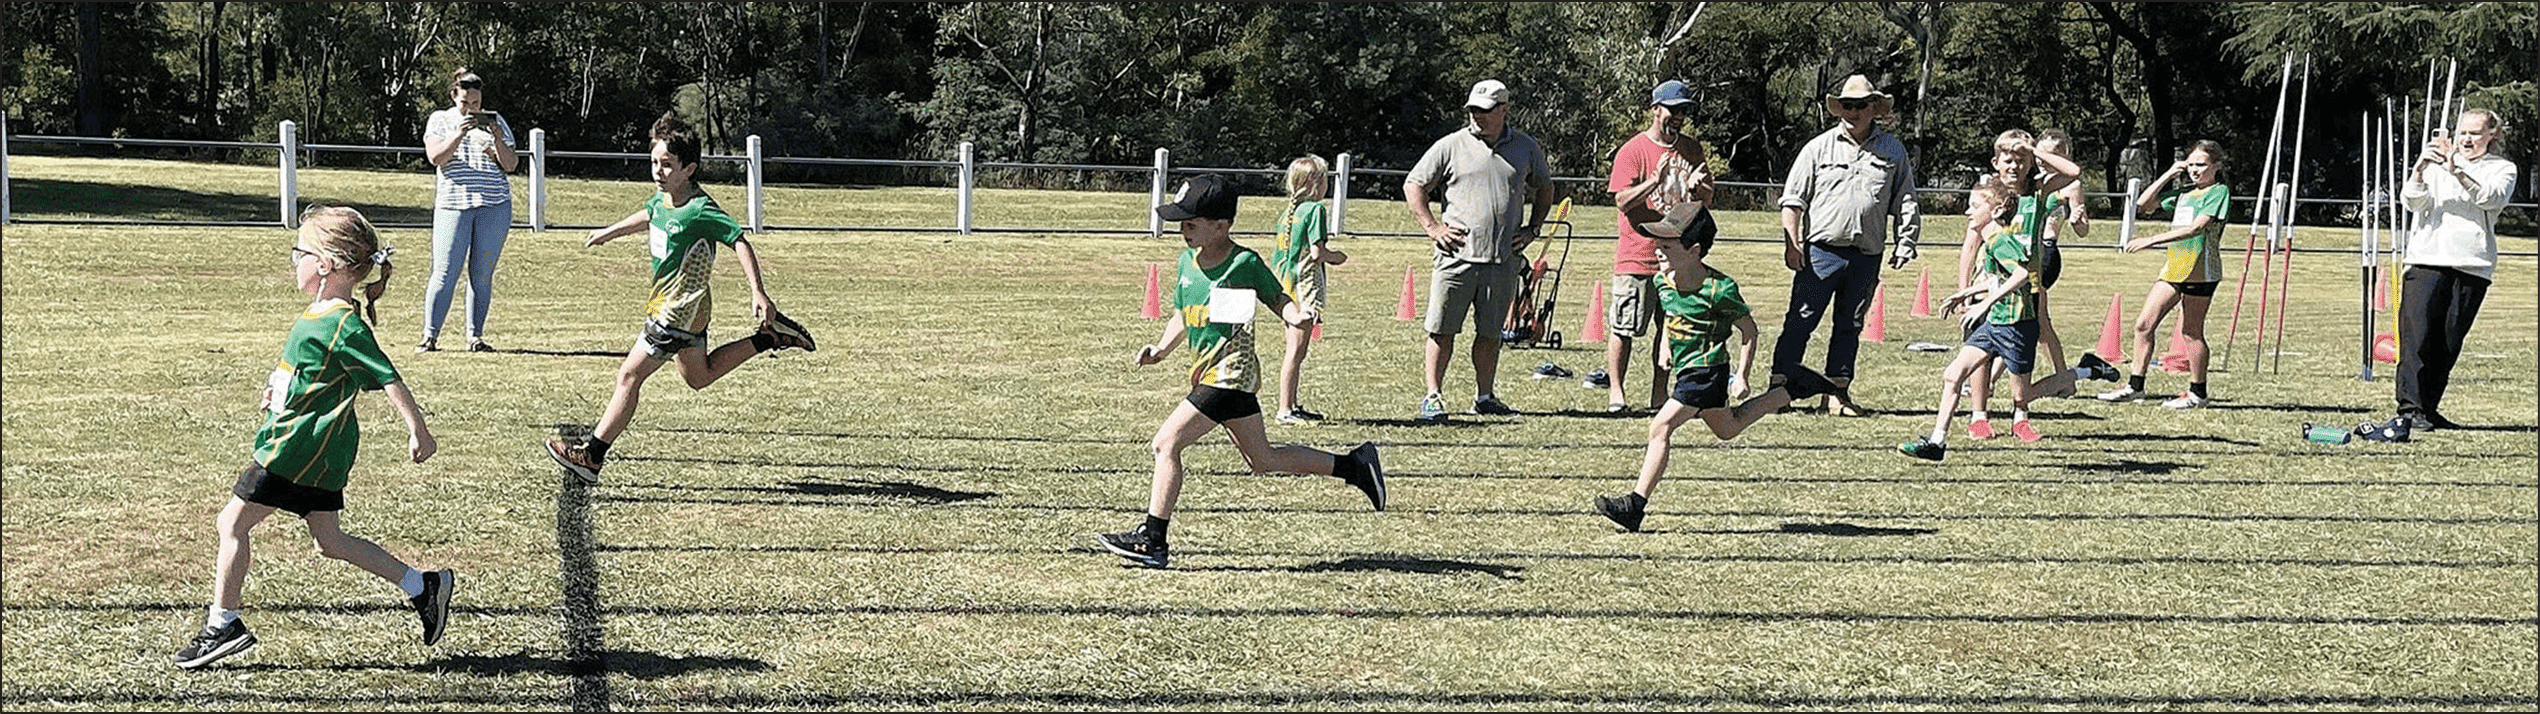 One of the heats in the Murrindindi Little Aths ‘gift’ race.